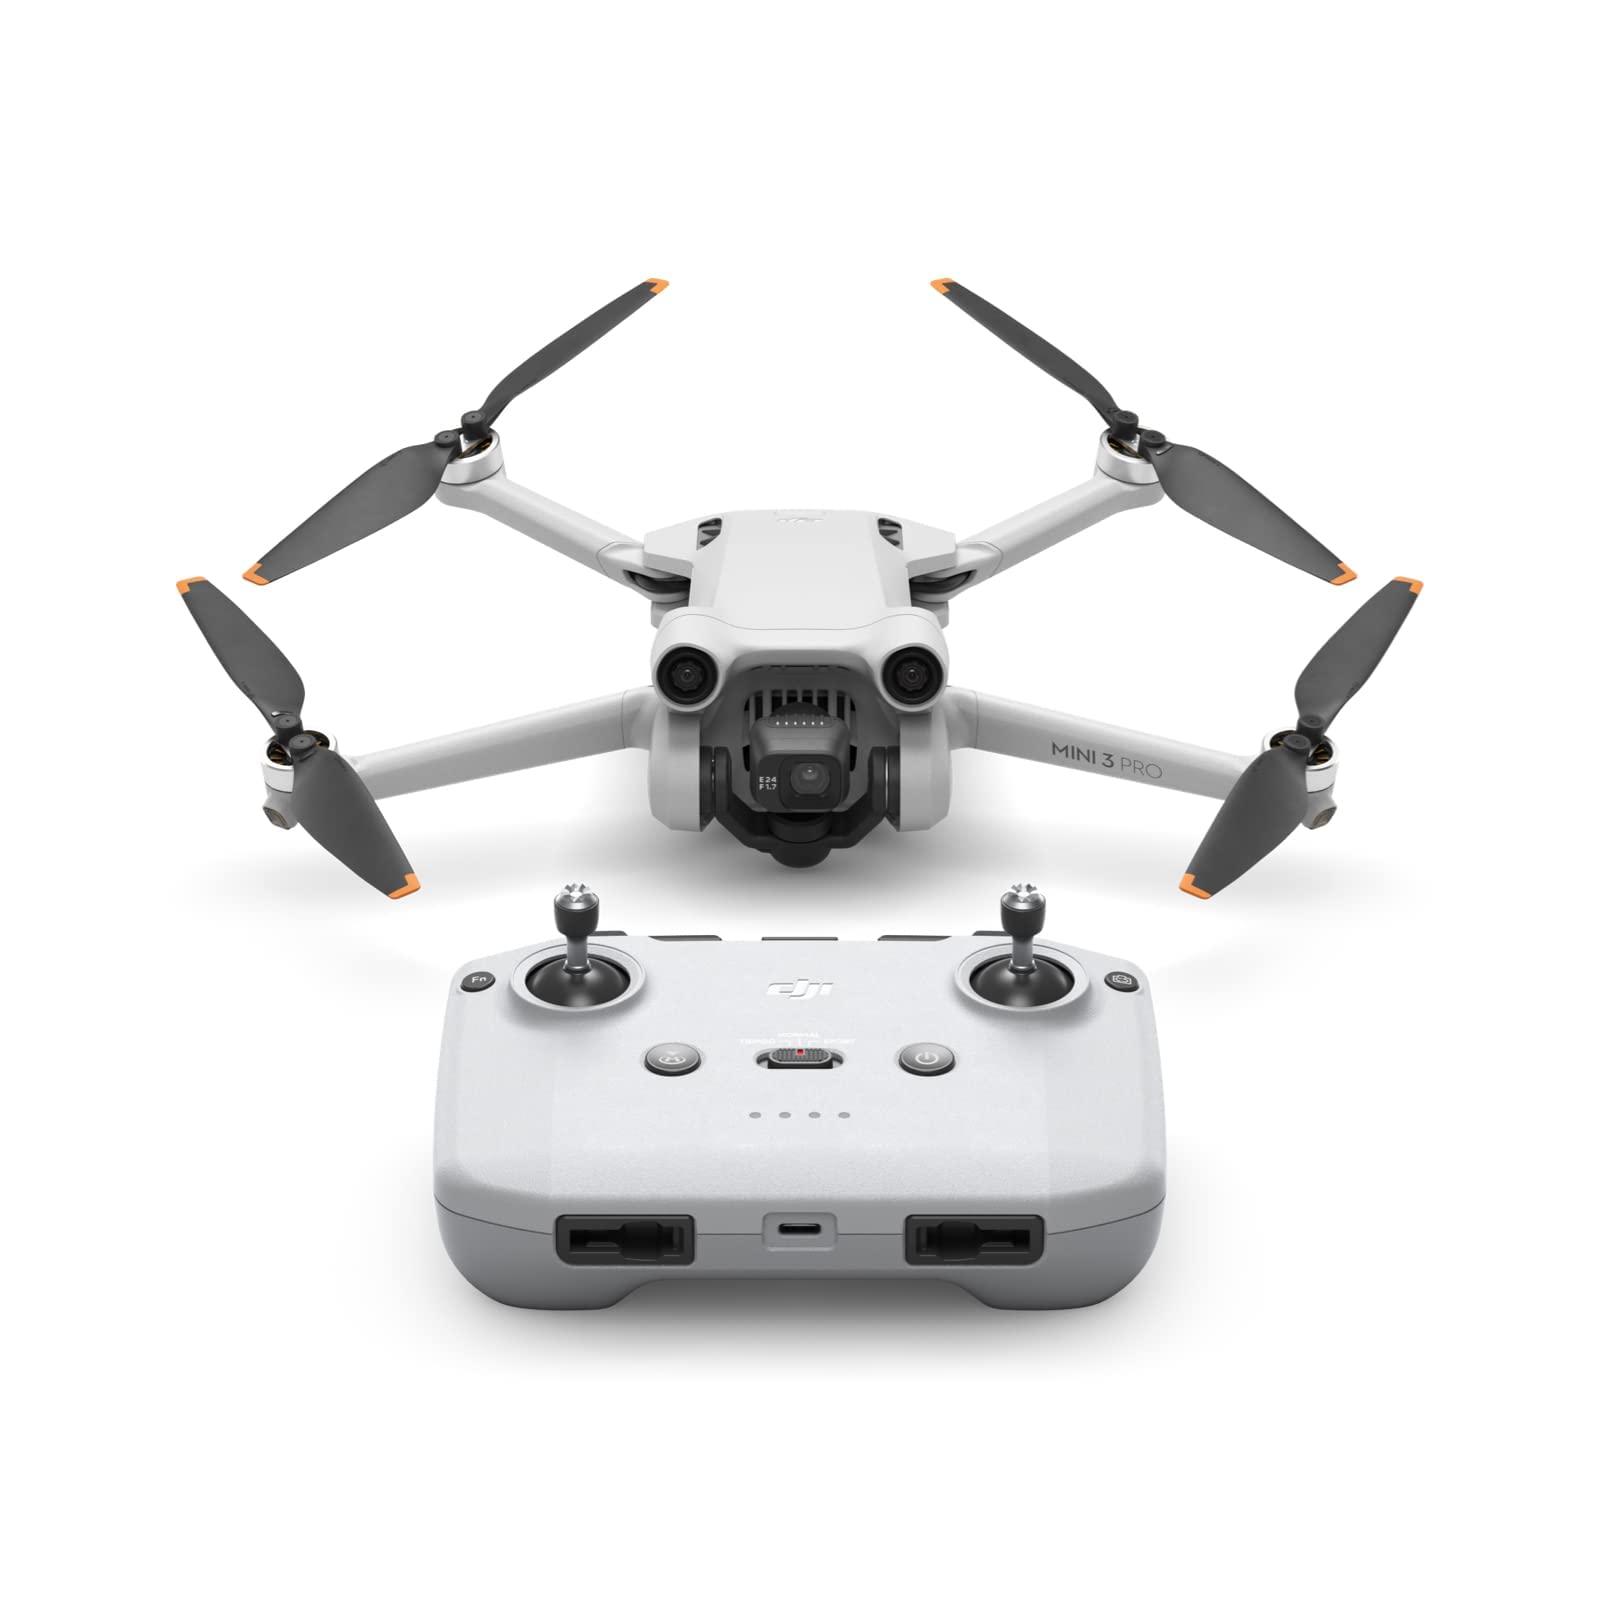 DJI Mini 3 Pro ( RC), Lightweight Foldable Camera Drone with 4K/60fps Video, 48MP, 34 Mins Flight Time, Less than 249 g, Front, Rear, Downward Obstacle Avoidance, Return to Home, for Drone Beginners